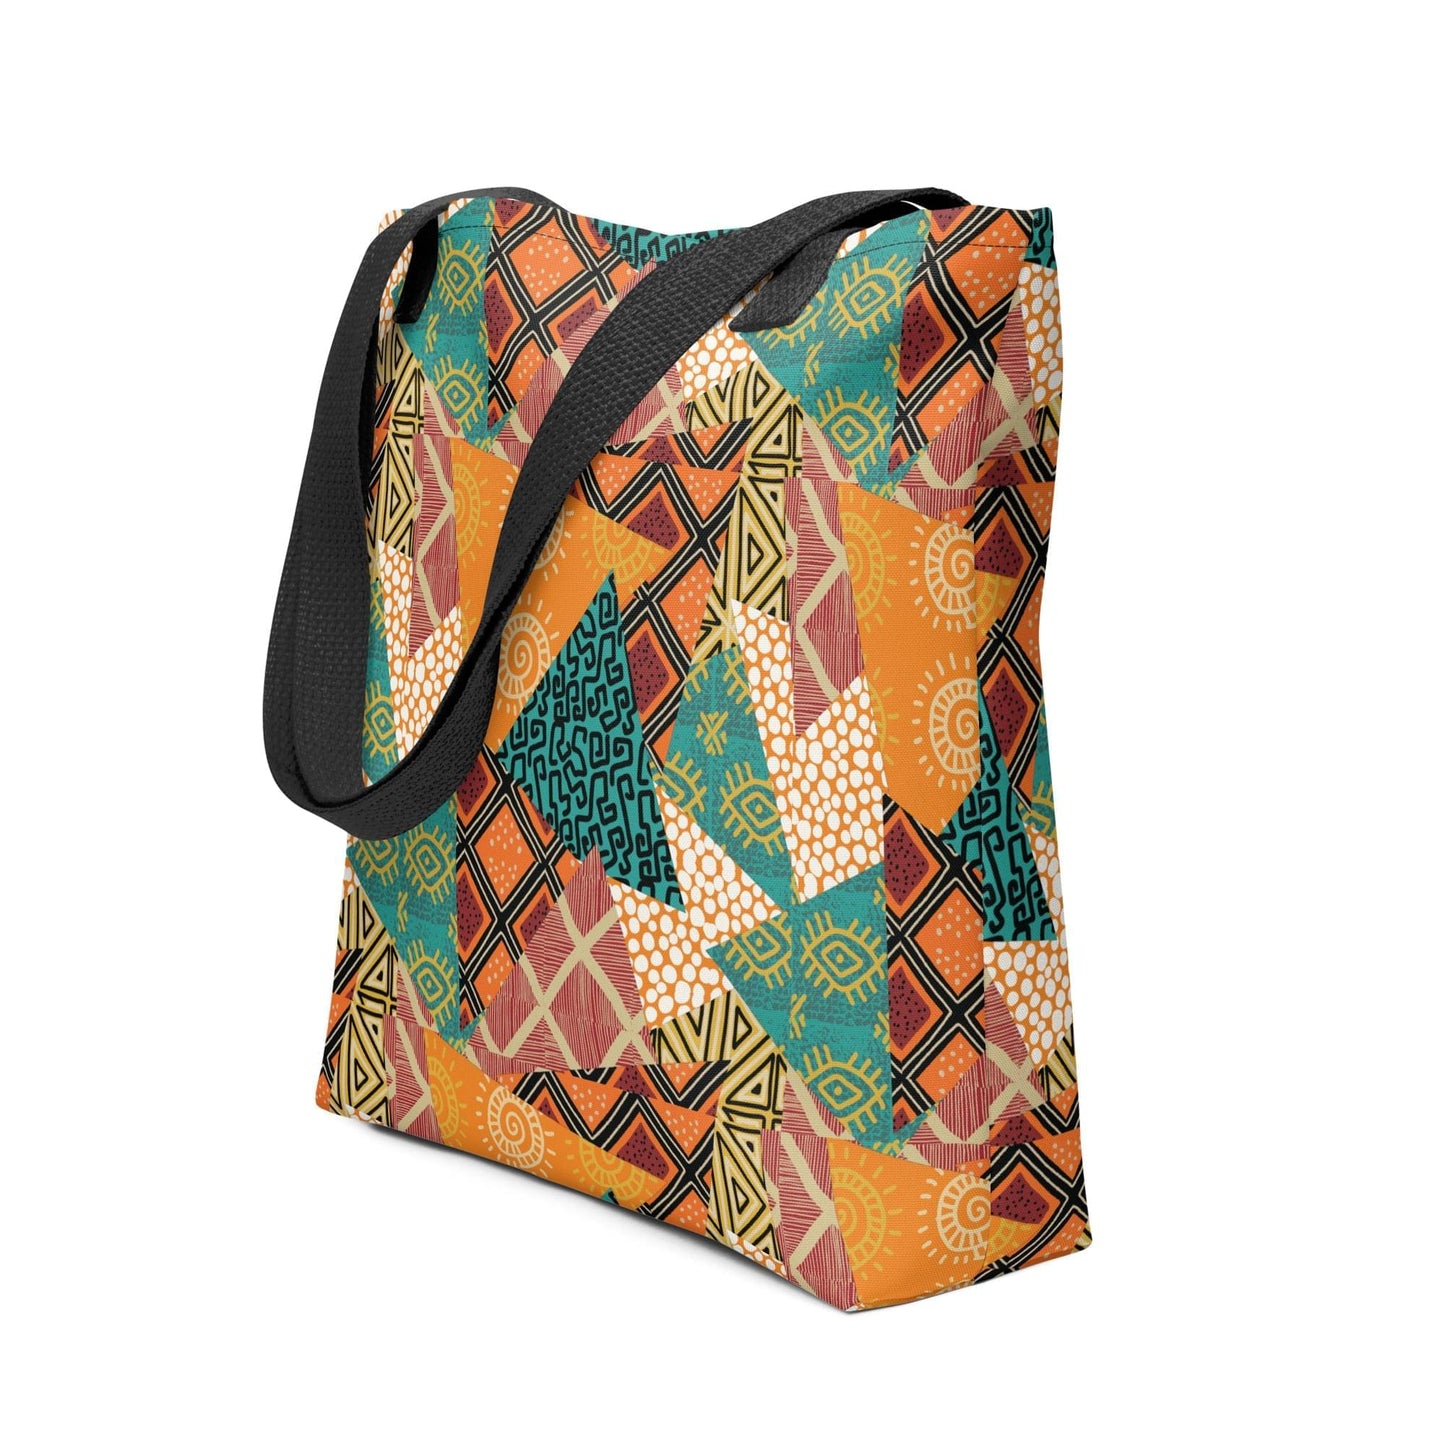 African Patchwork Tote Bag